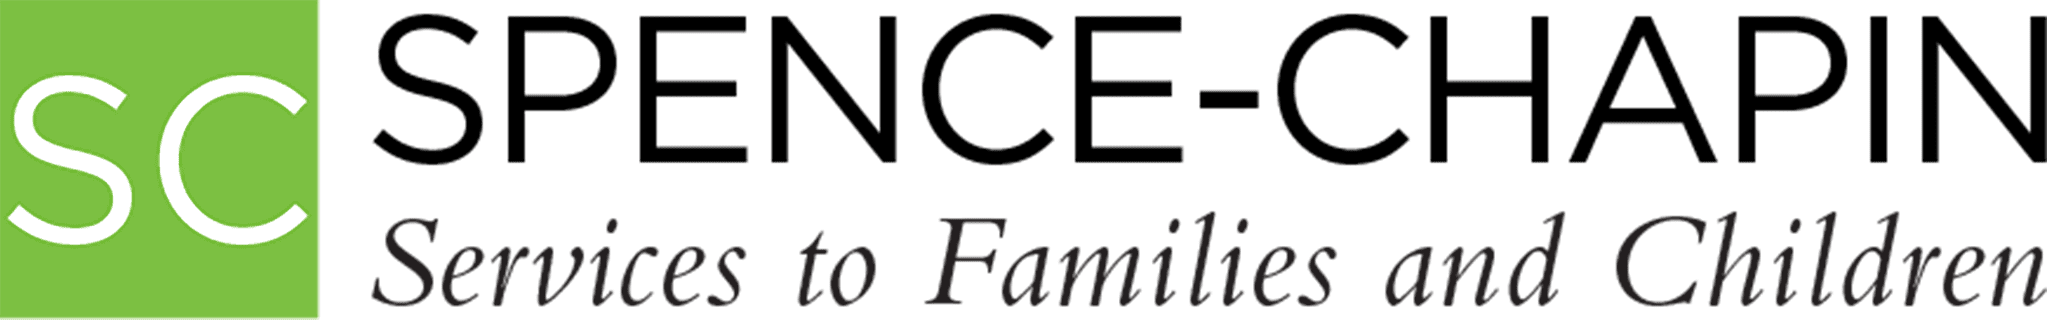 Spence-Chapin Services to Families and Children